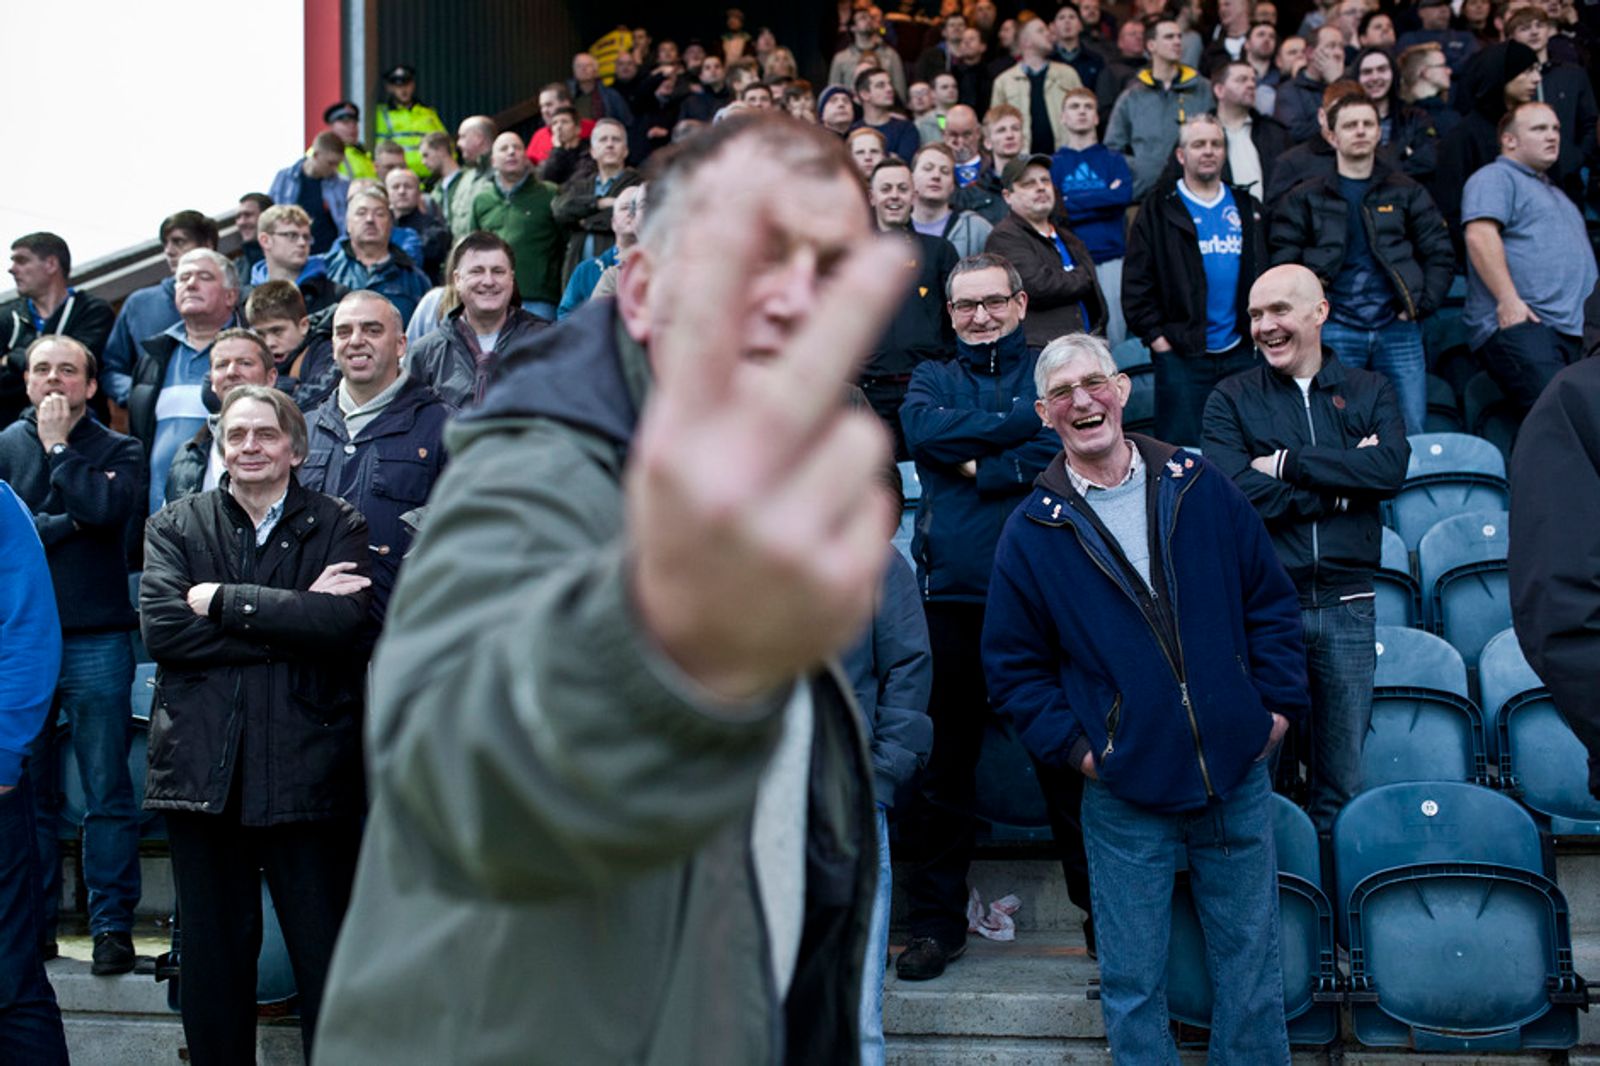 © David Shaw - Oldham fans at the local rivalry away - Rochdale.